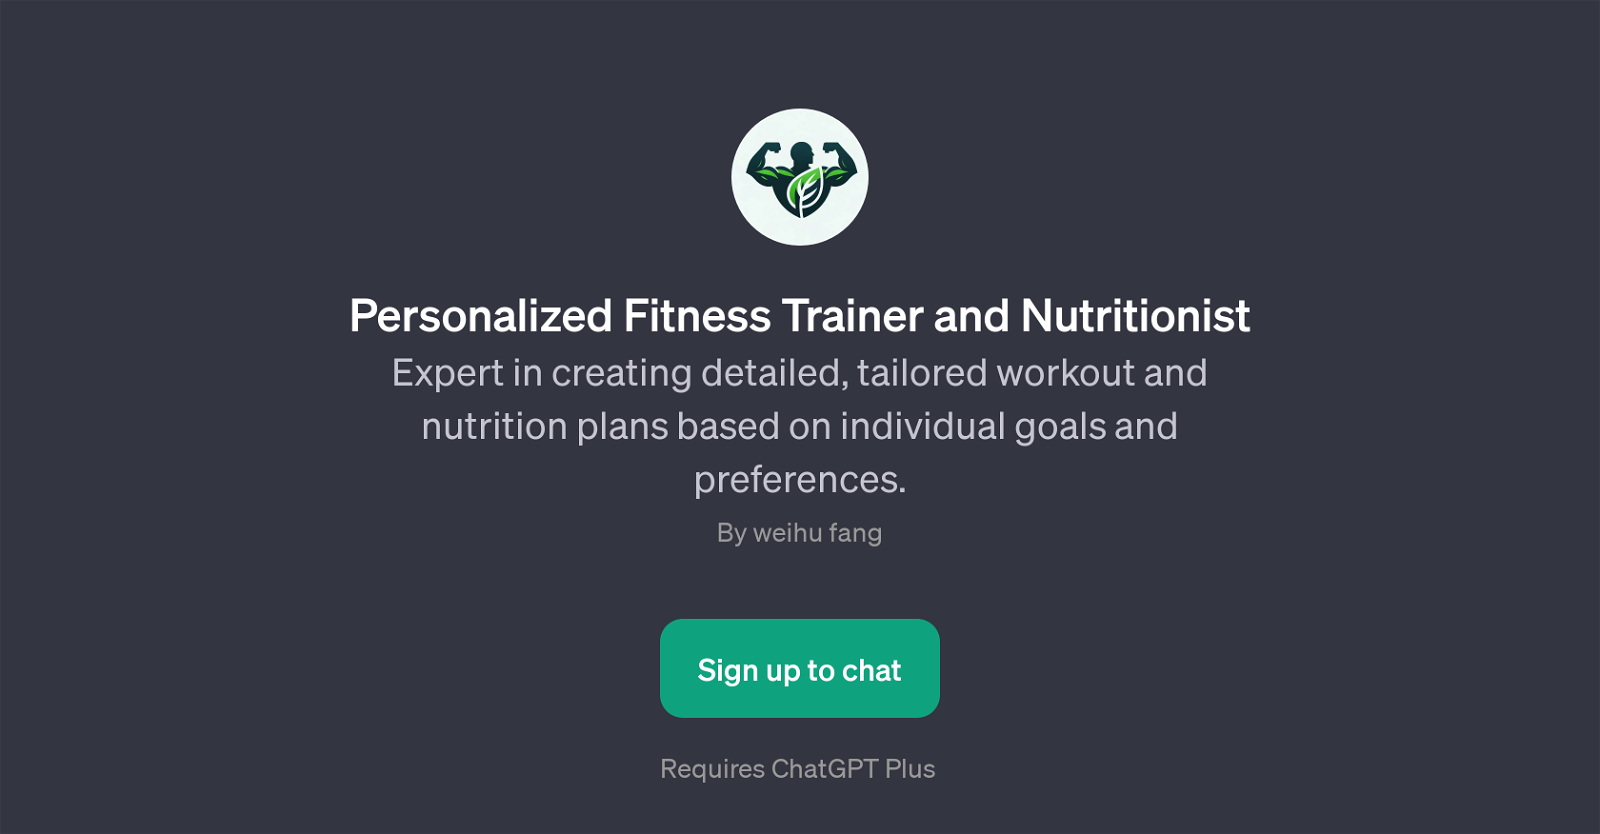 Personalized Fitness Trainer and Nutritionist website